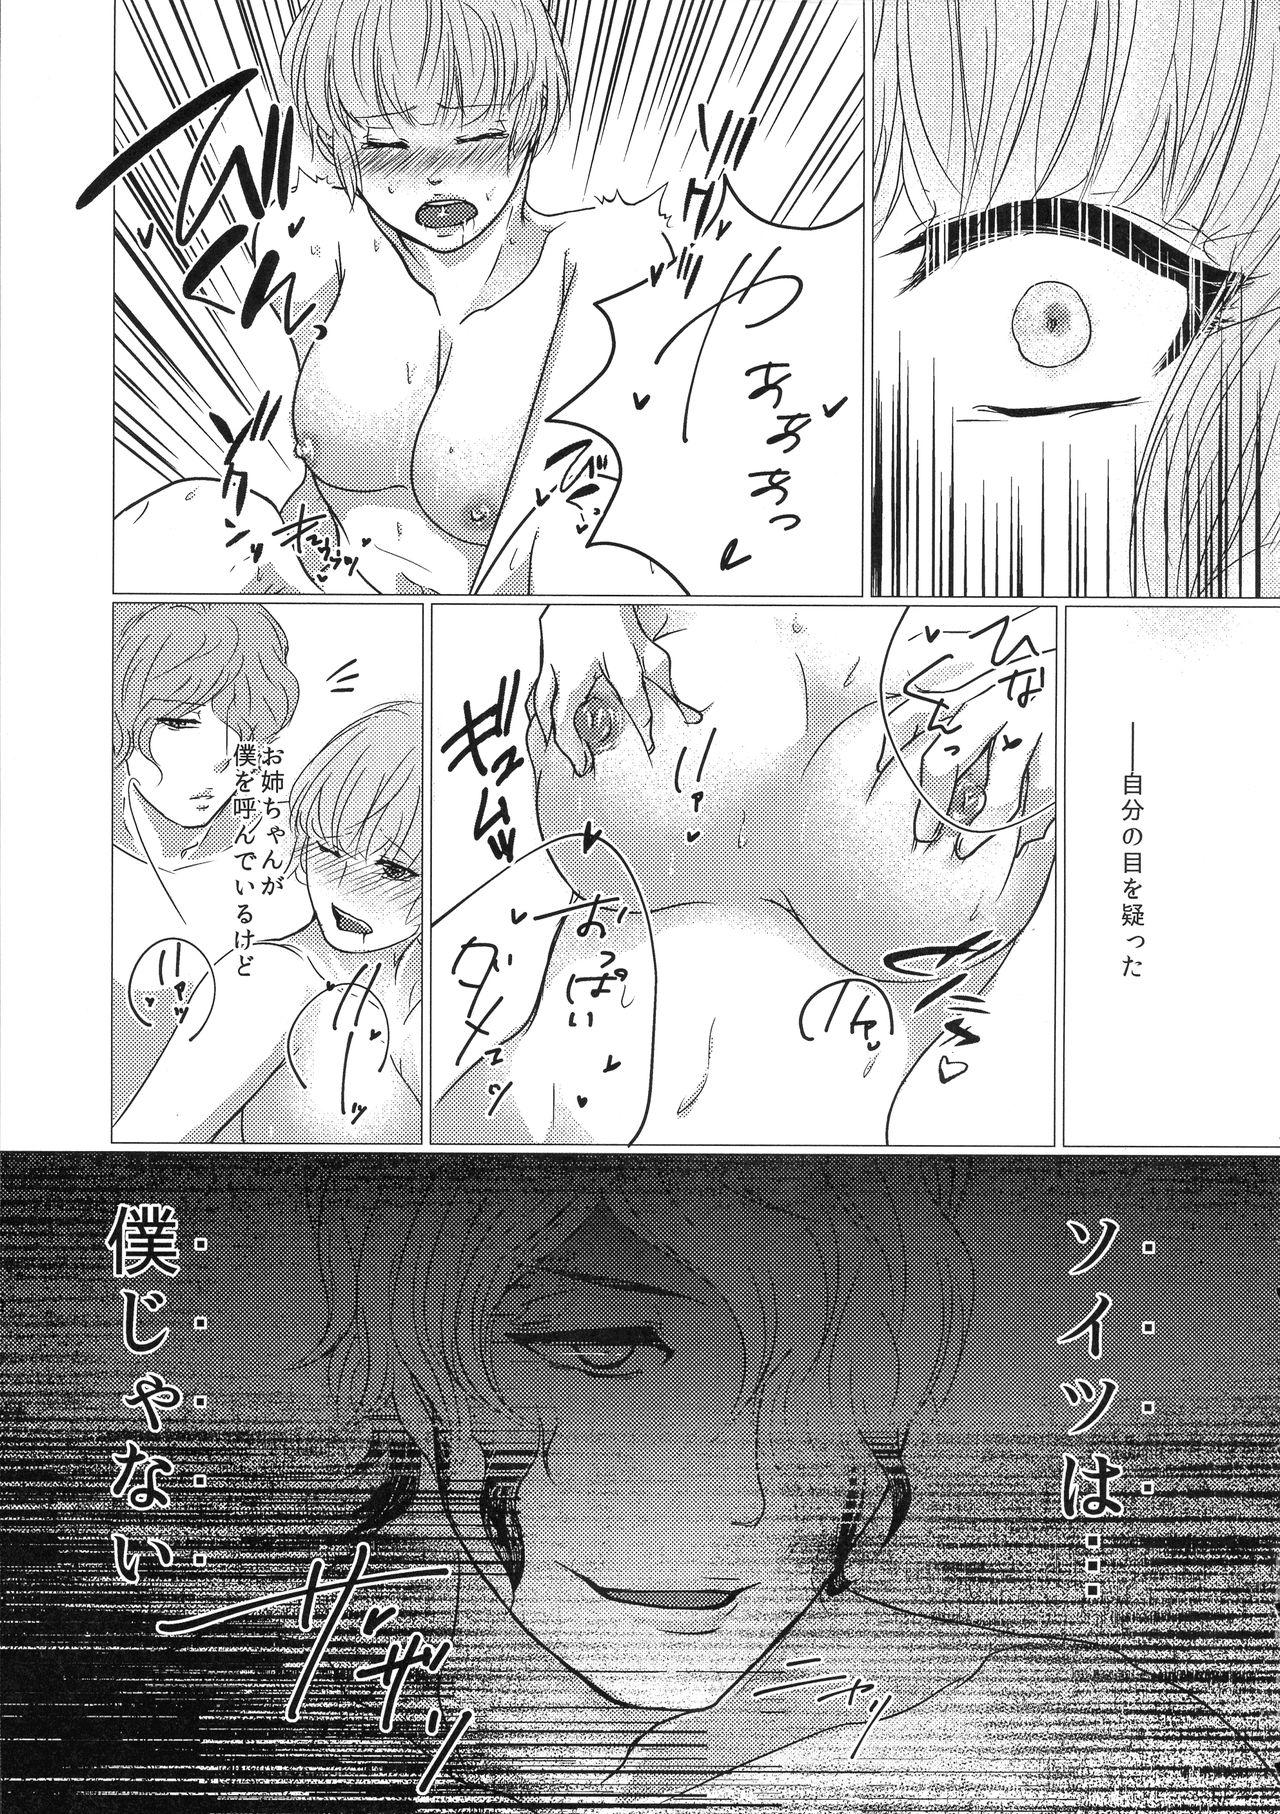 Titten I/O - Psycho-pass Colombia - Page 9